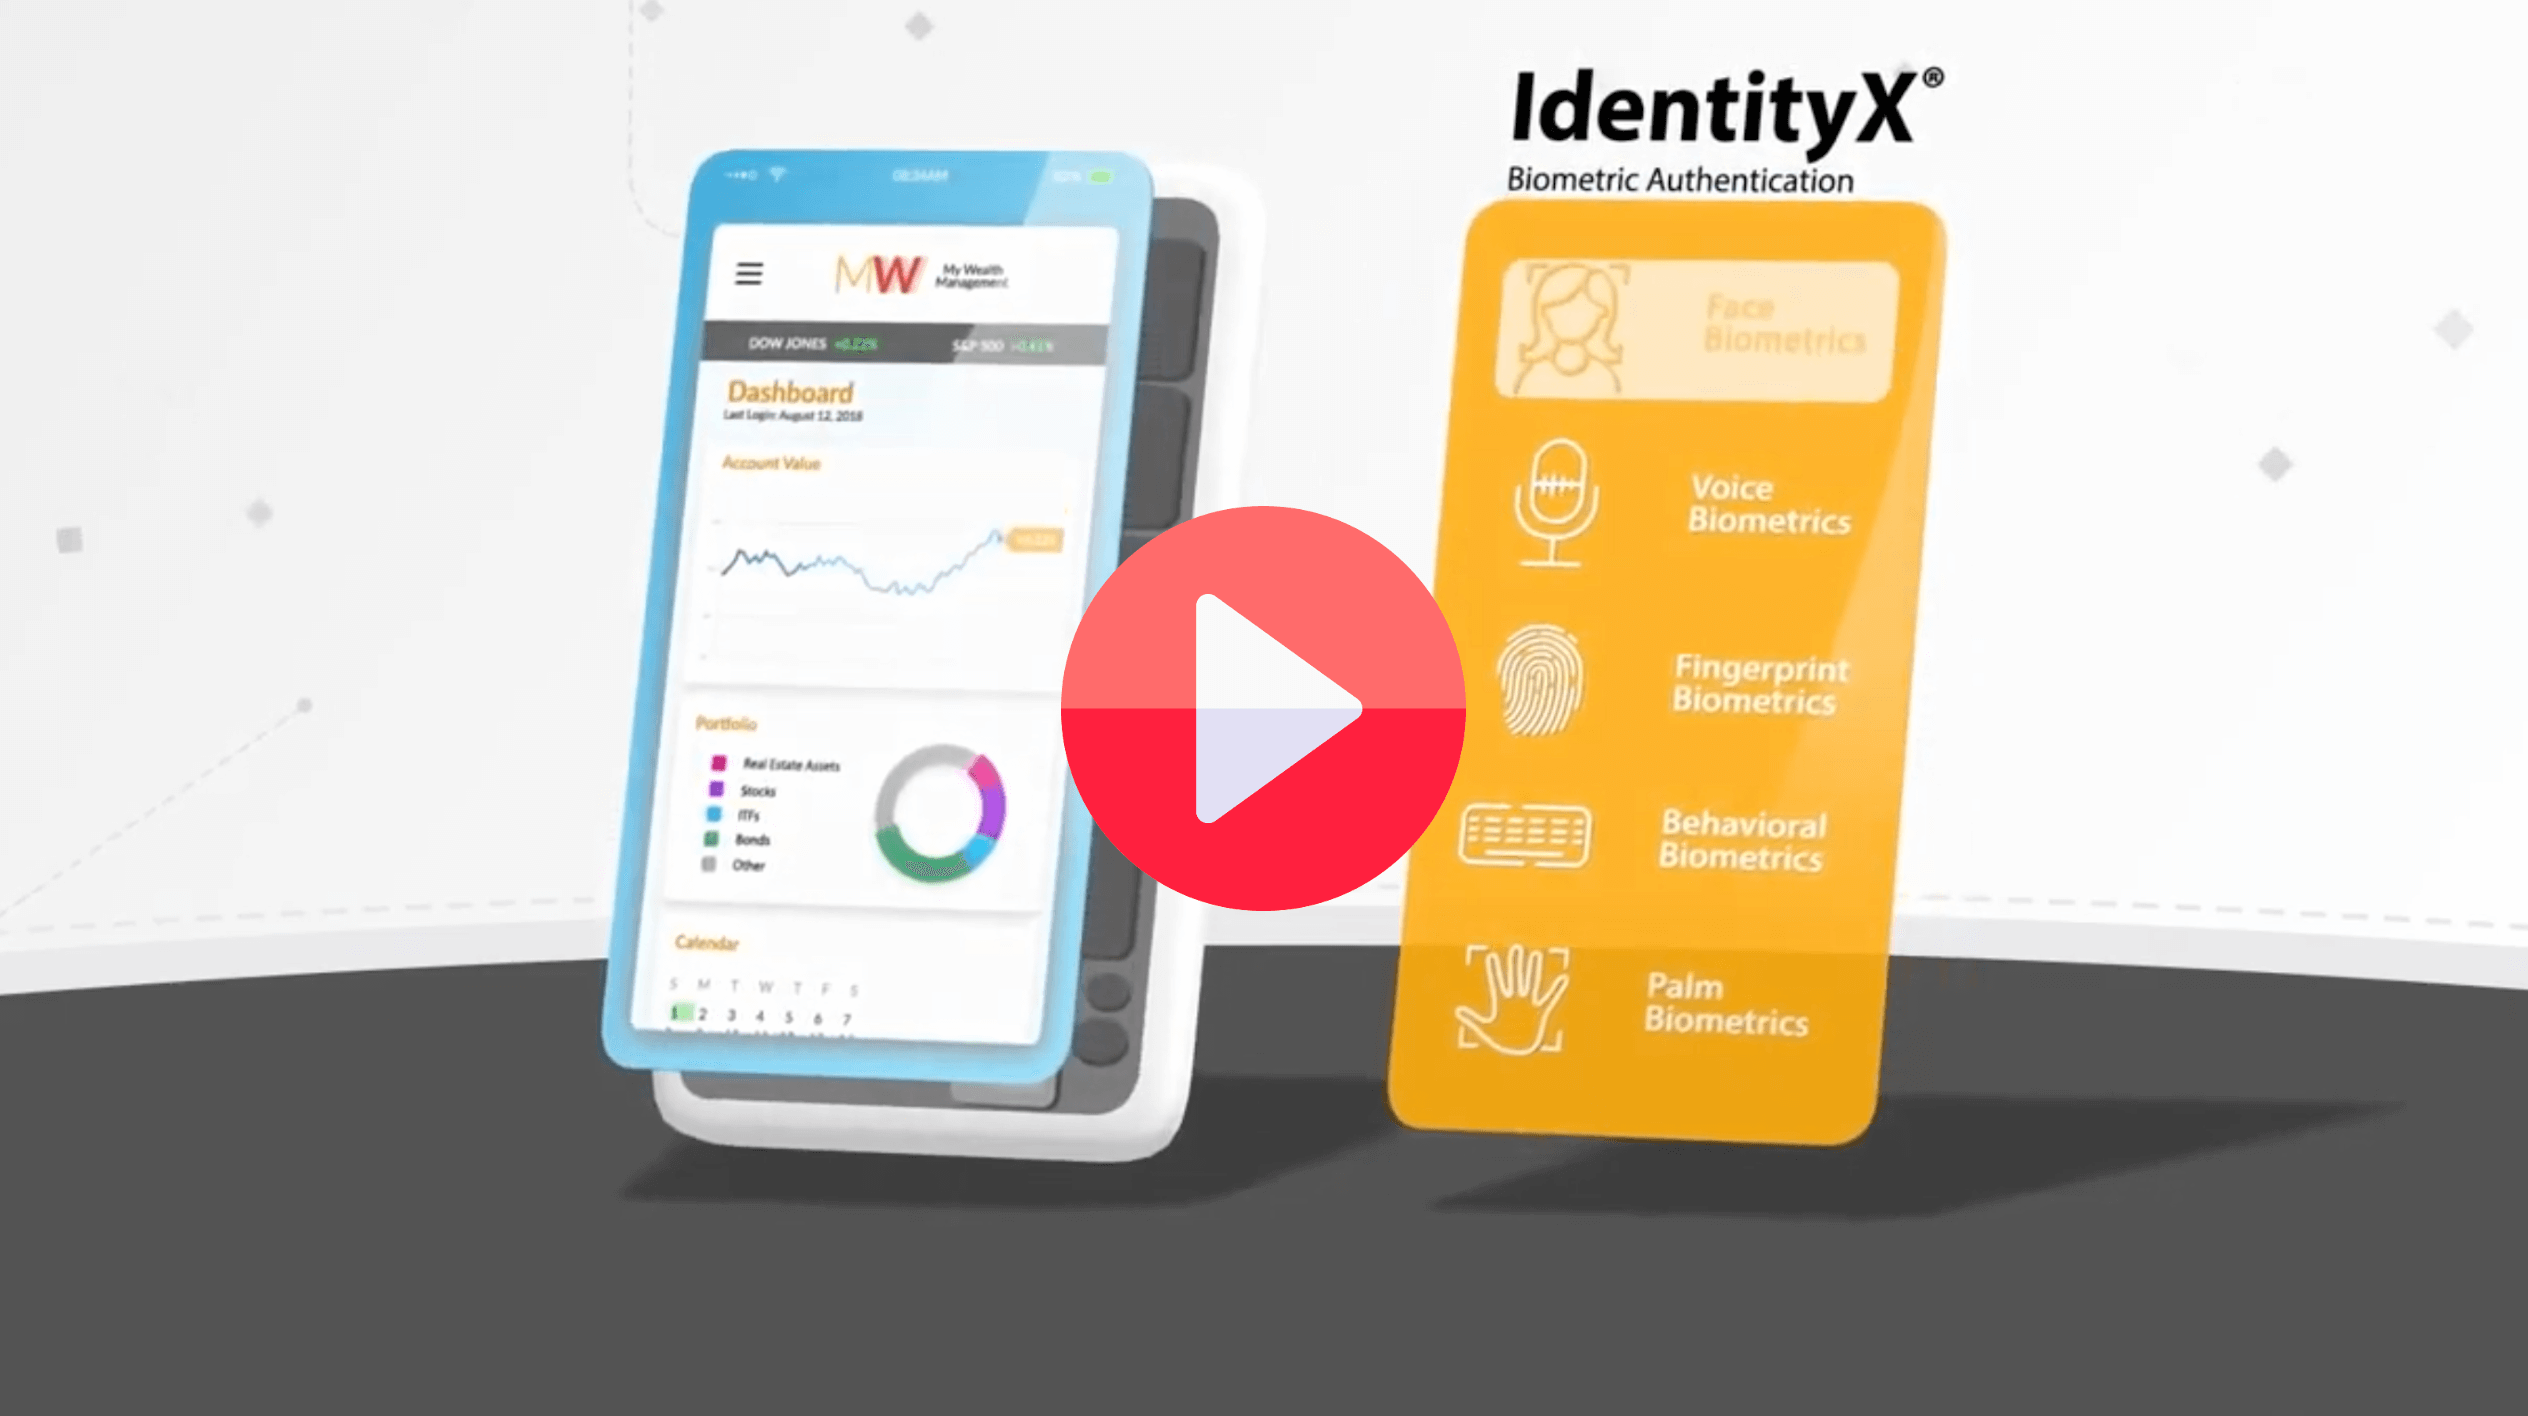 Video screen of IdentityX mobile authentication